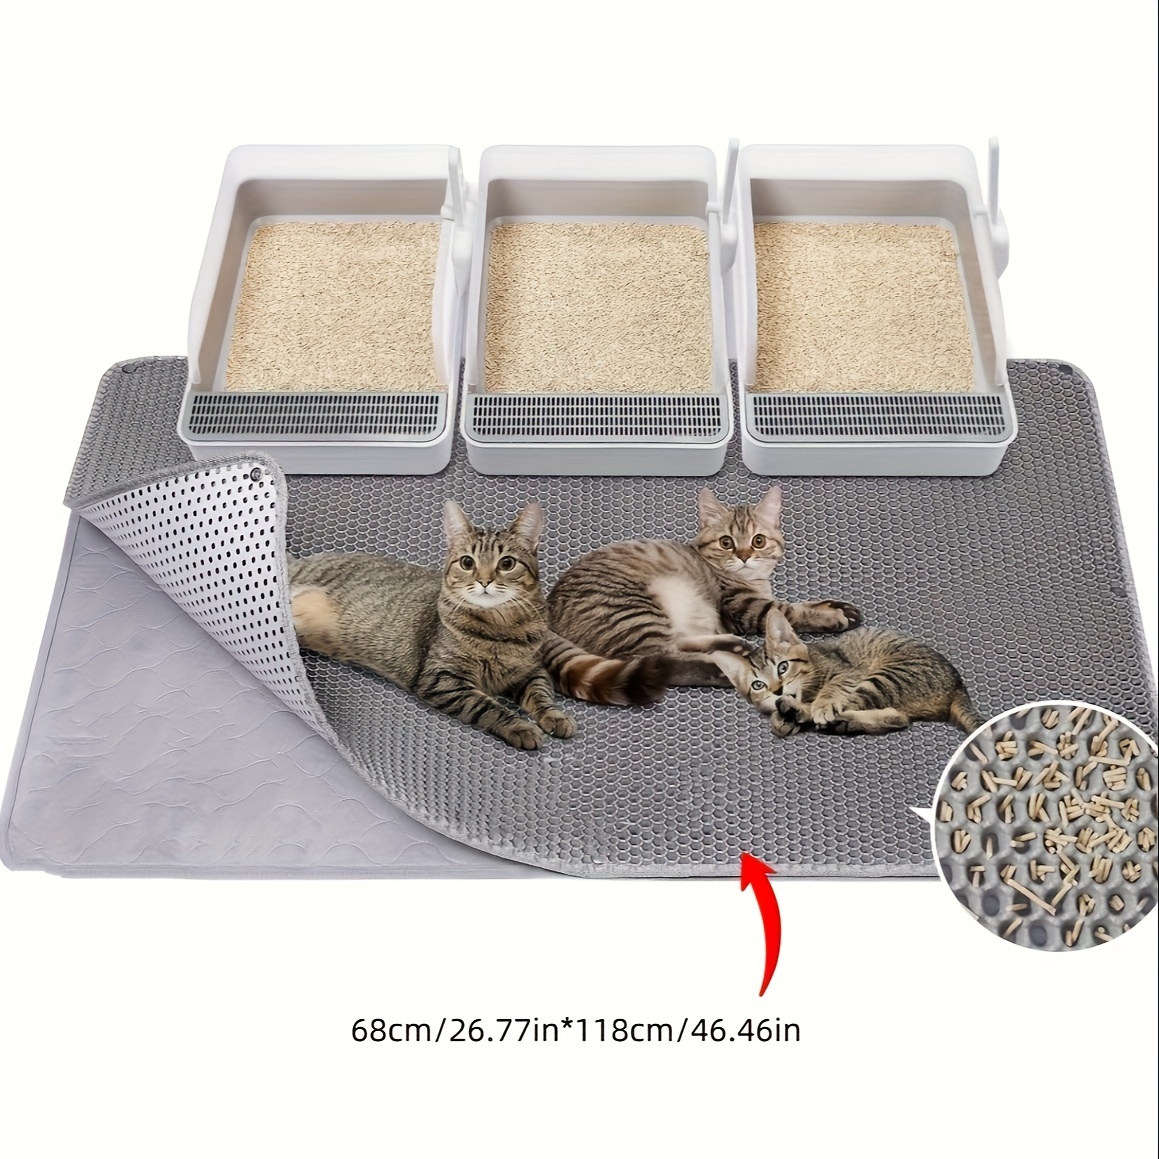 

Large Cat Litter Pad, Beautiful Cat Litter Pad, Honeycomb Hole Litter Pad, Urine Water Proof, Easy To Clean